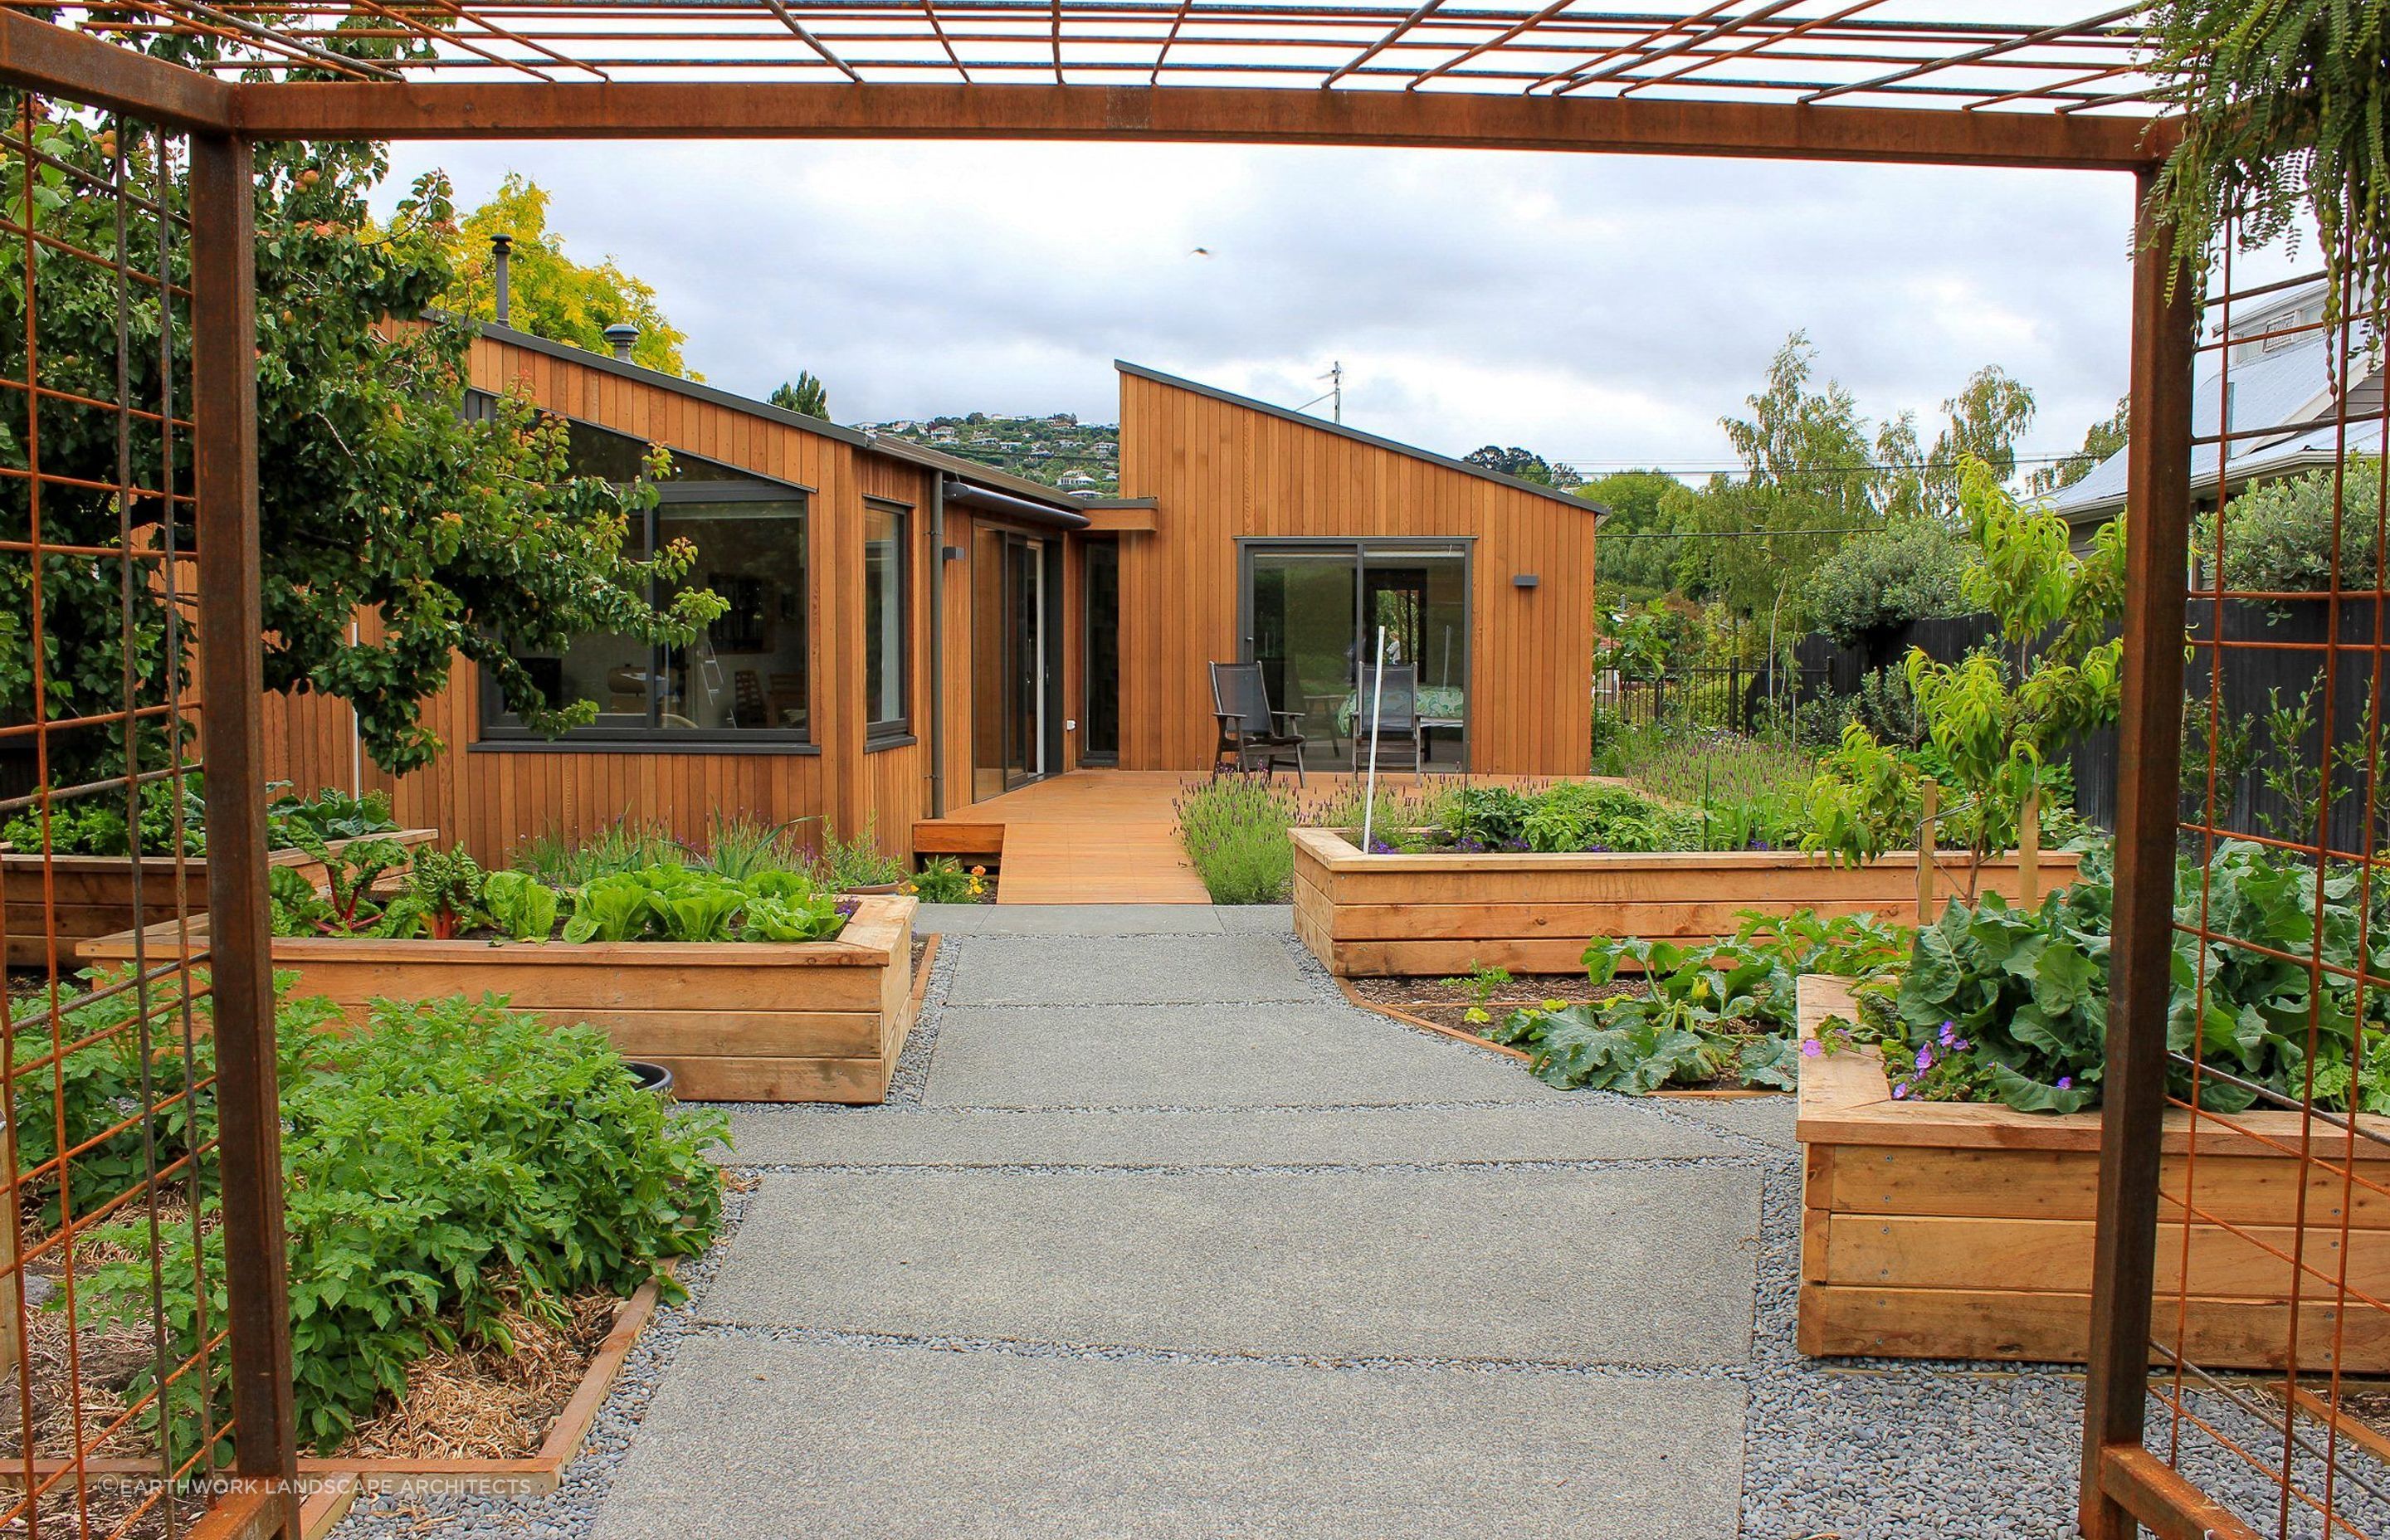 A productive garden that is easily accessed from this Opawa home thanks to thoughtfully designed deck and paving.